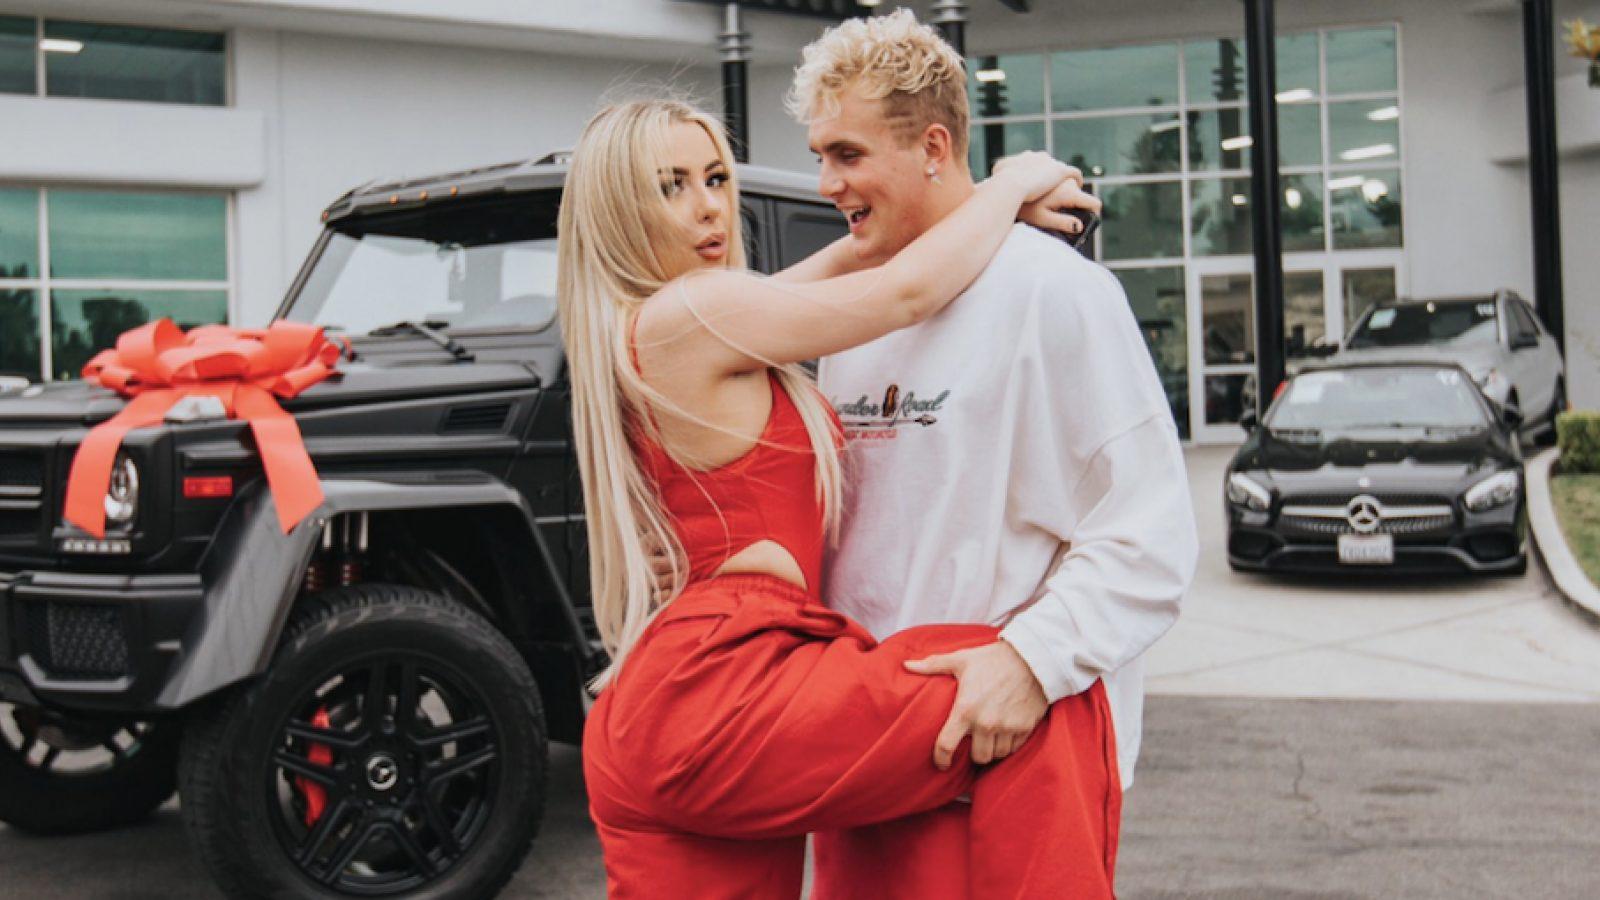 Jake Paul and Tana Mongeau 'engaged' after YouTuber proposes